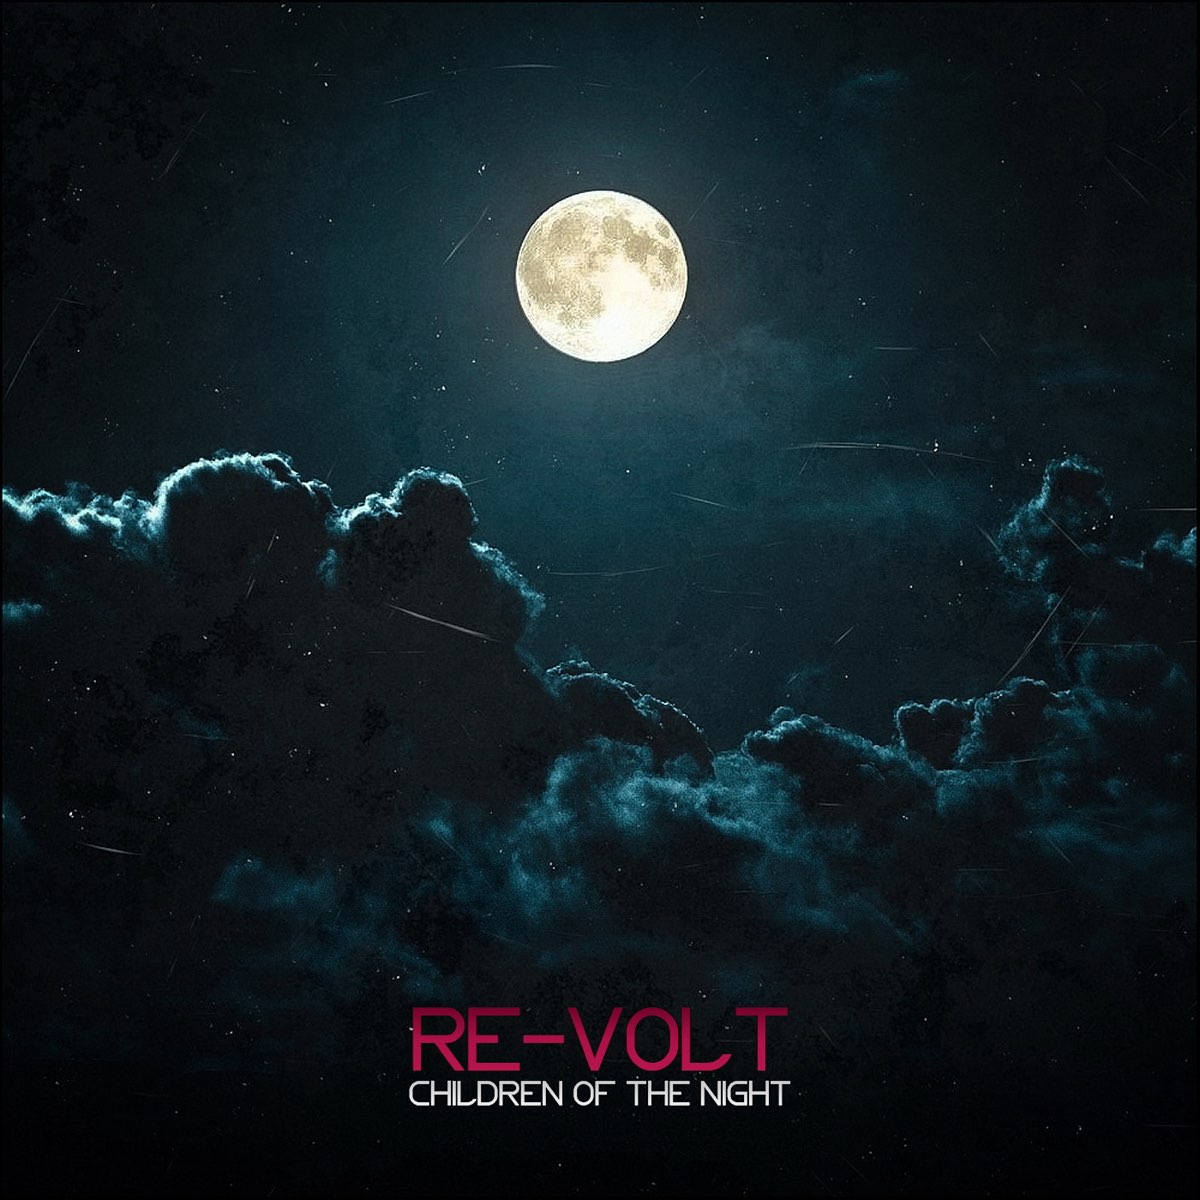 Children of the Night - Single by Re-Volt on Apple Music